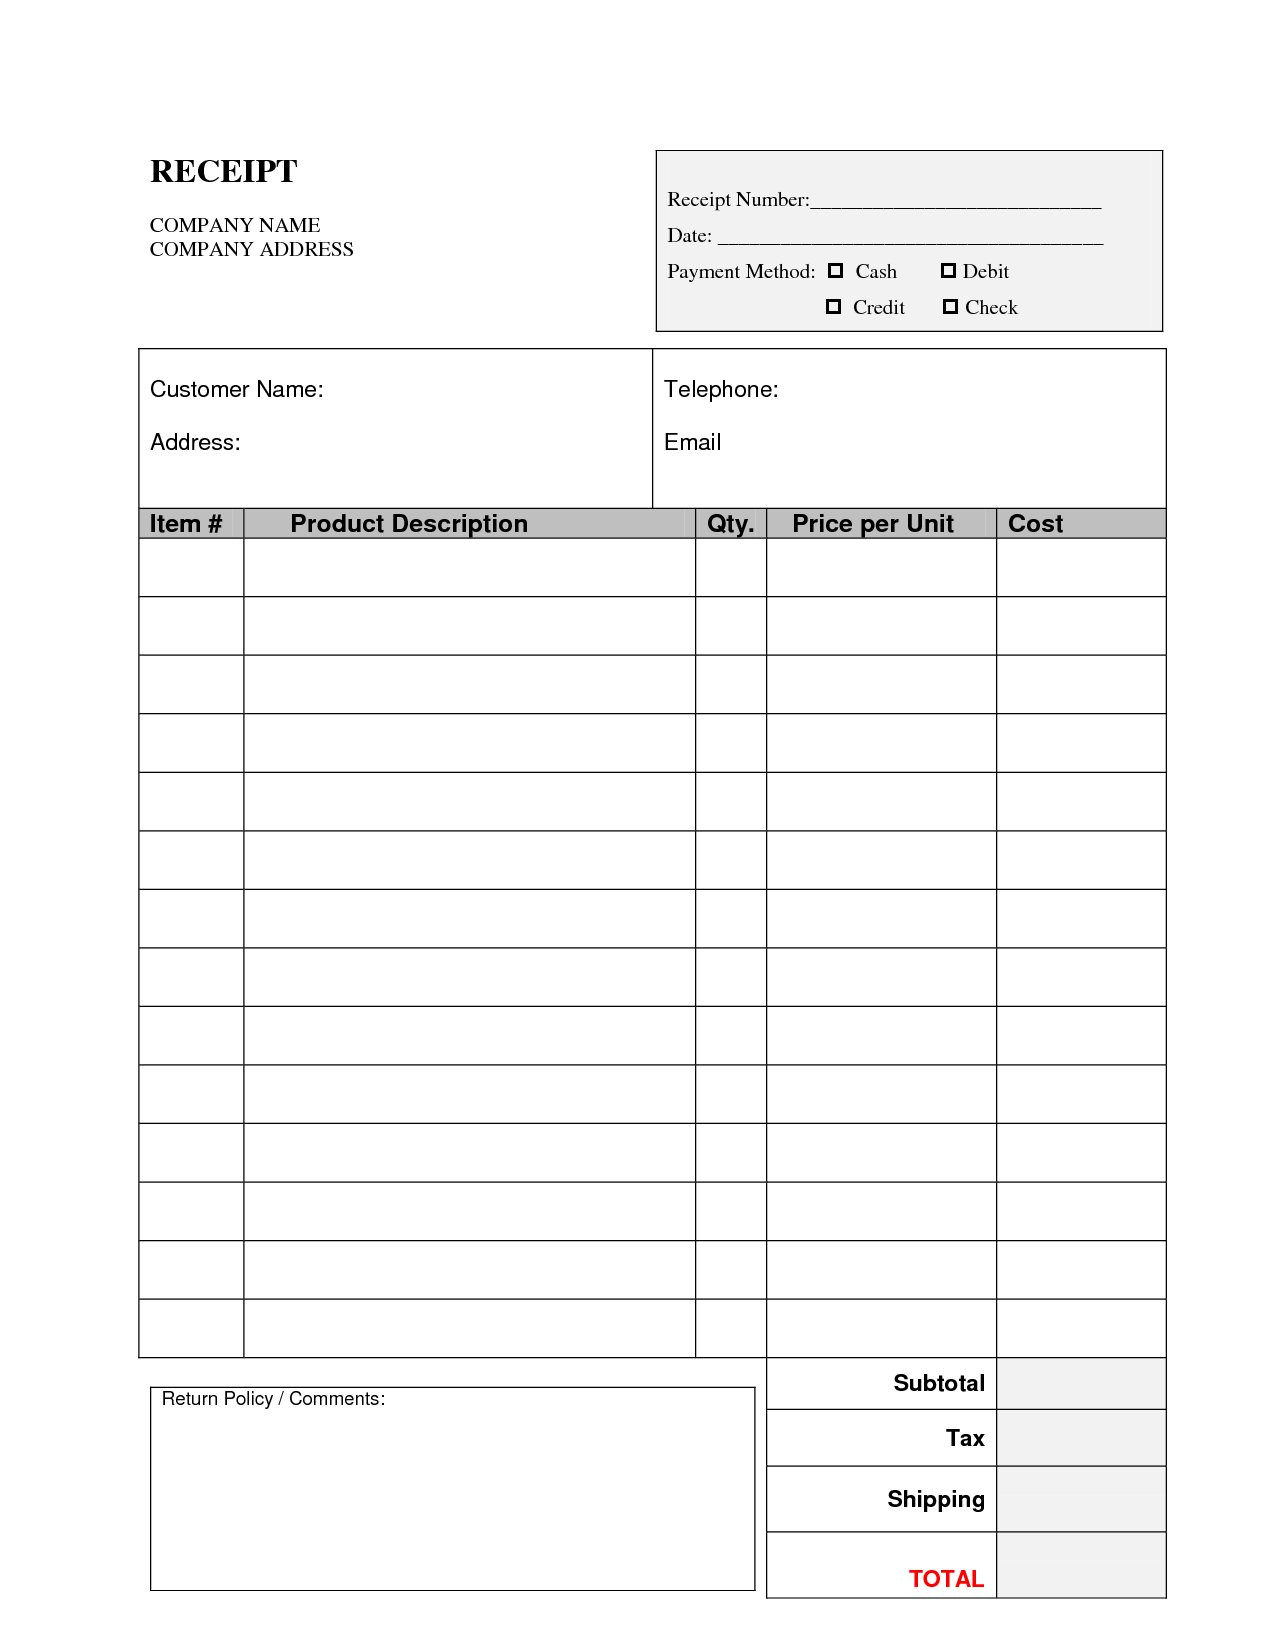 Blank Invoice Template Blank Invoices Nutemplates 17 Blank Invoice 